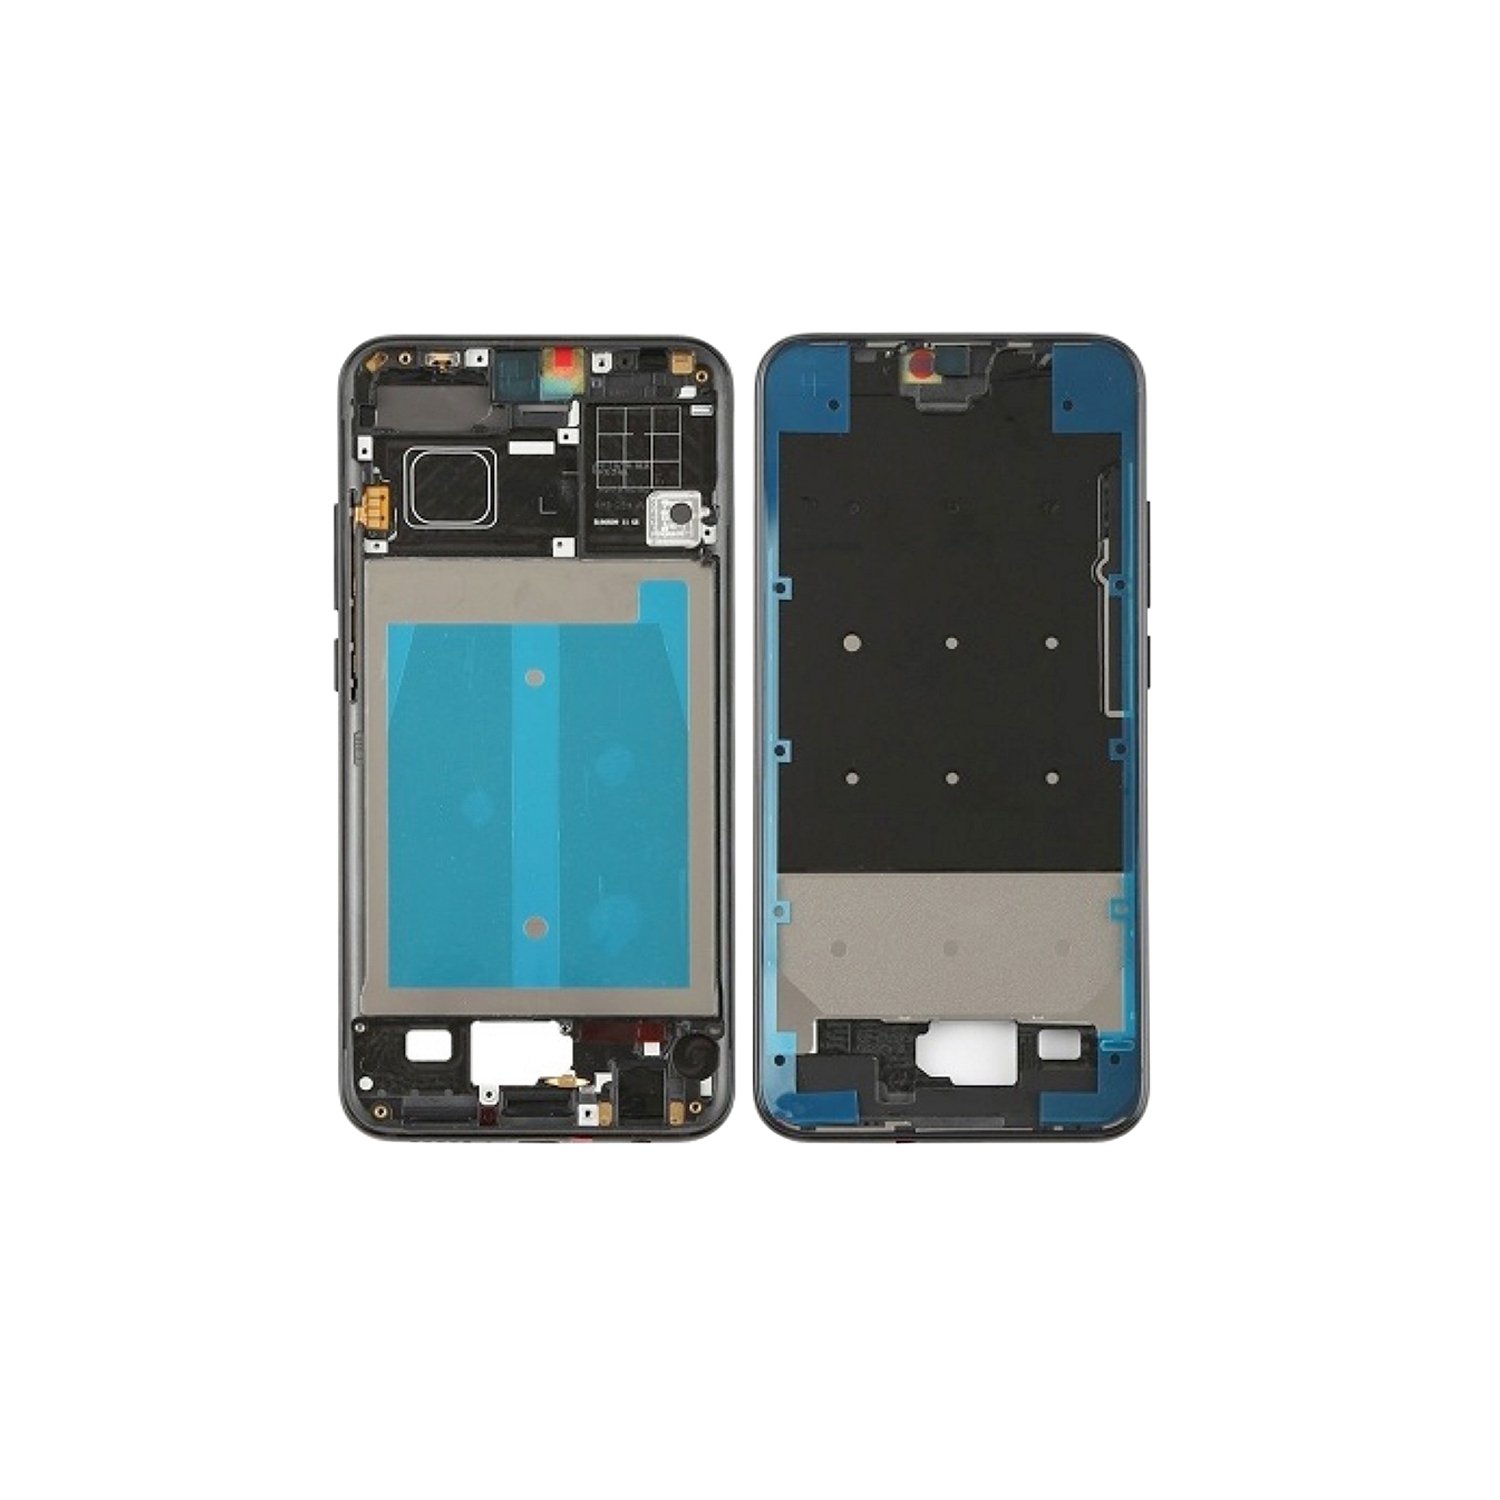 Replacement Front Housing LCD Frame Bezel Plate Compatible With Huawei Honor 10 - Black